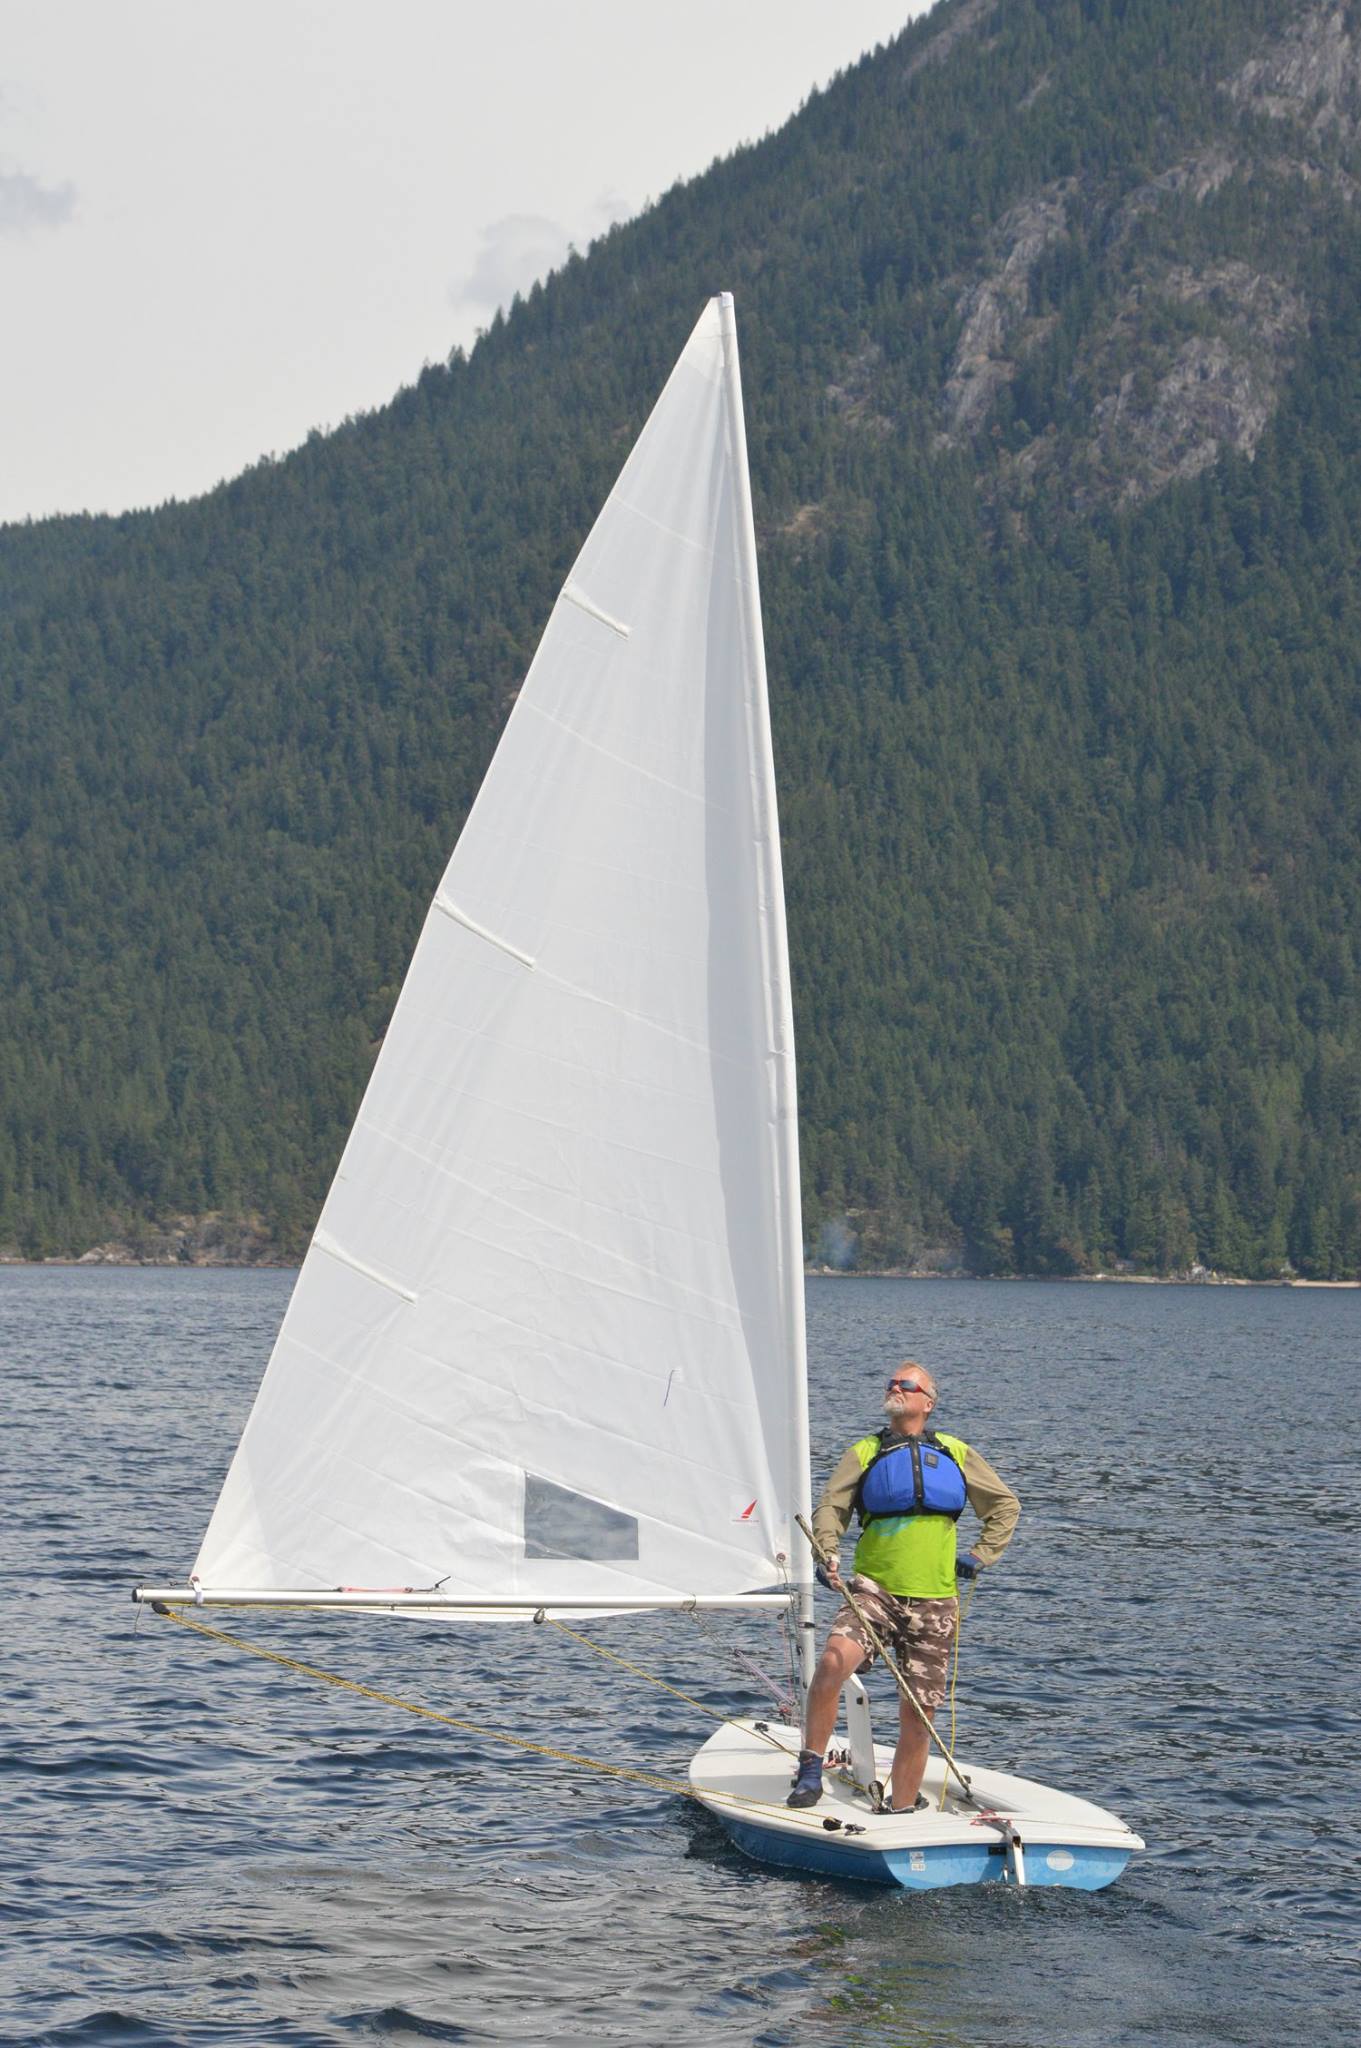 Thomas in light winds with mount richardson in the background.